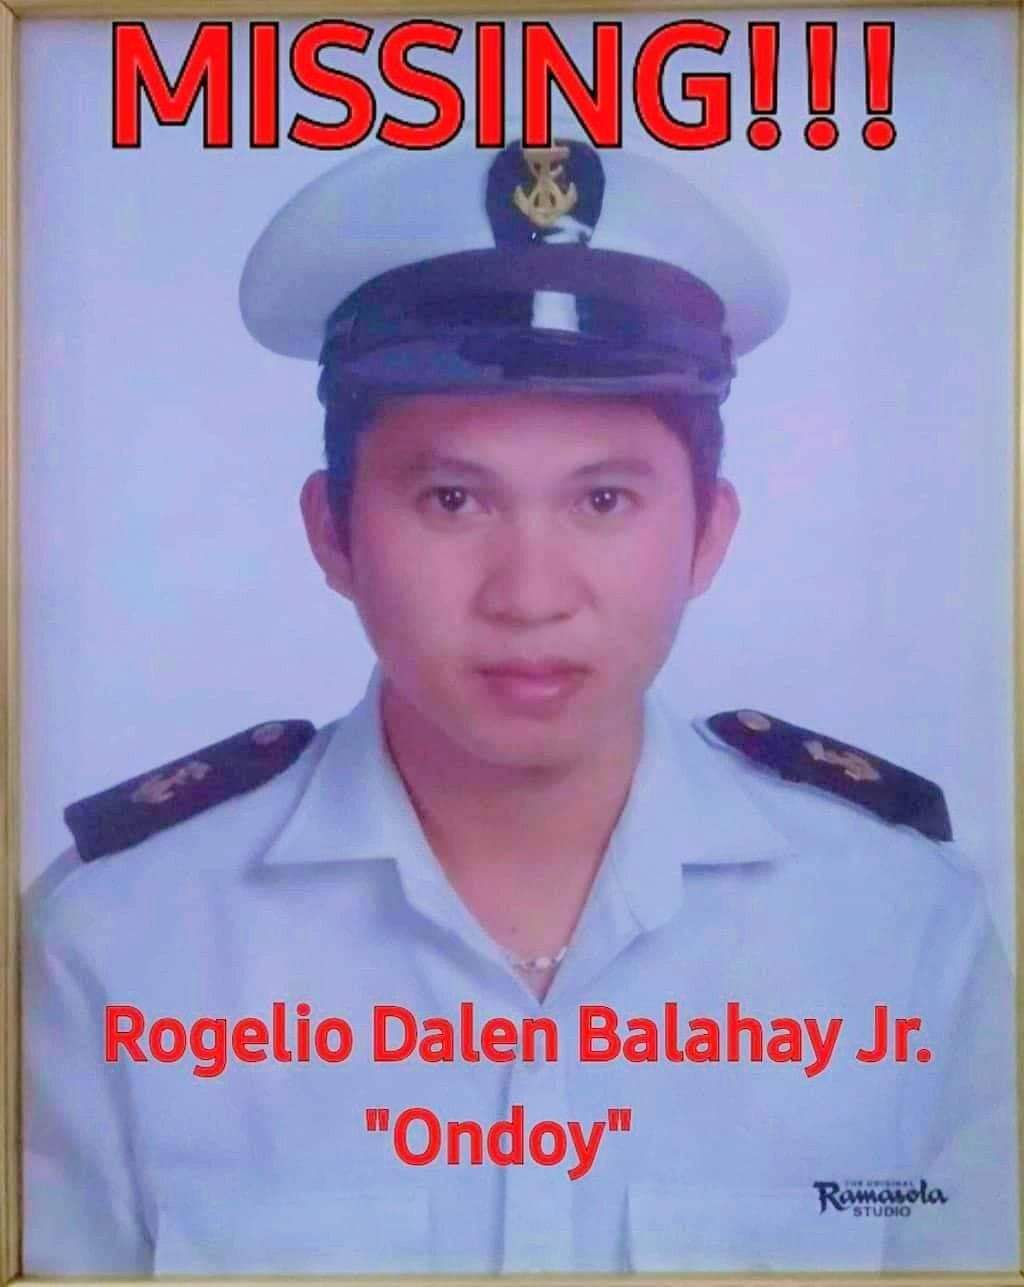 Boholano family seeks help to locate their ‘missing’ relative onboard bulk carrier